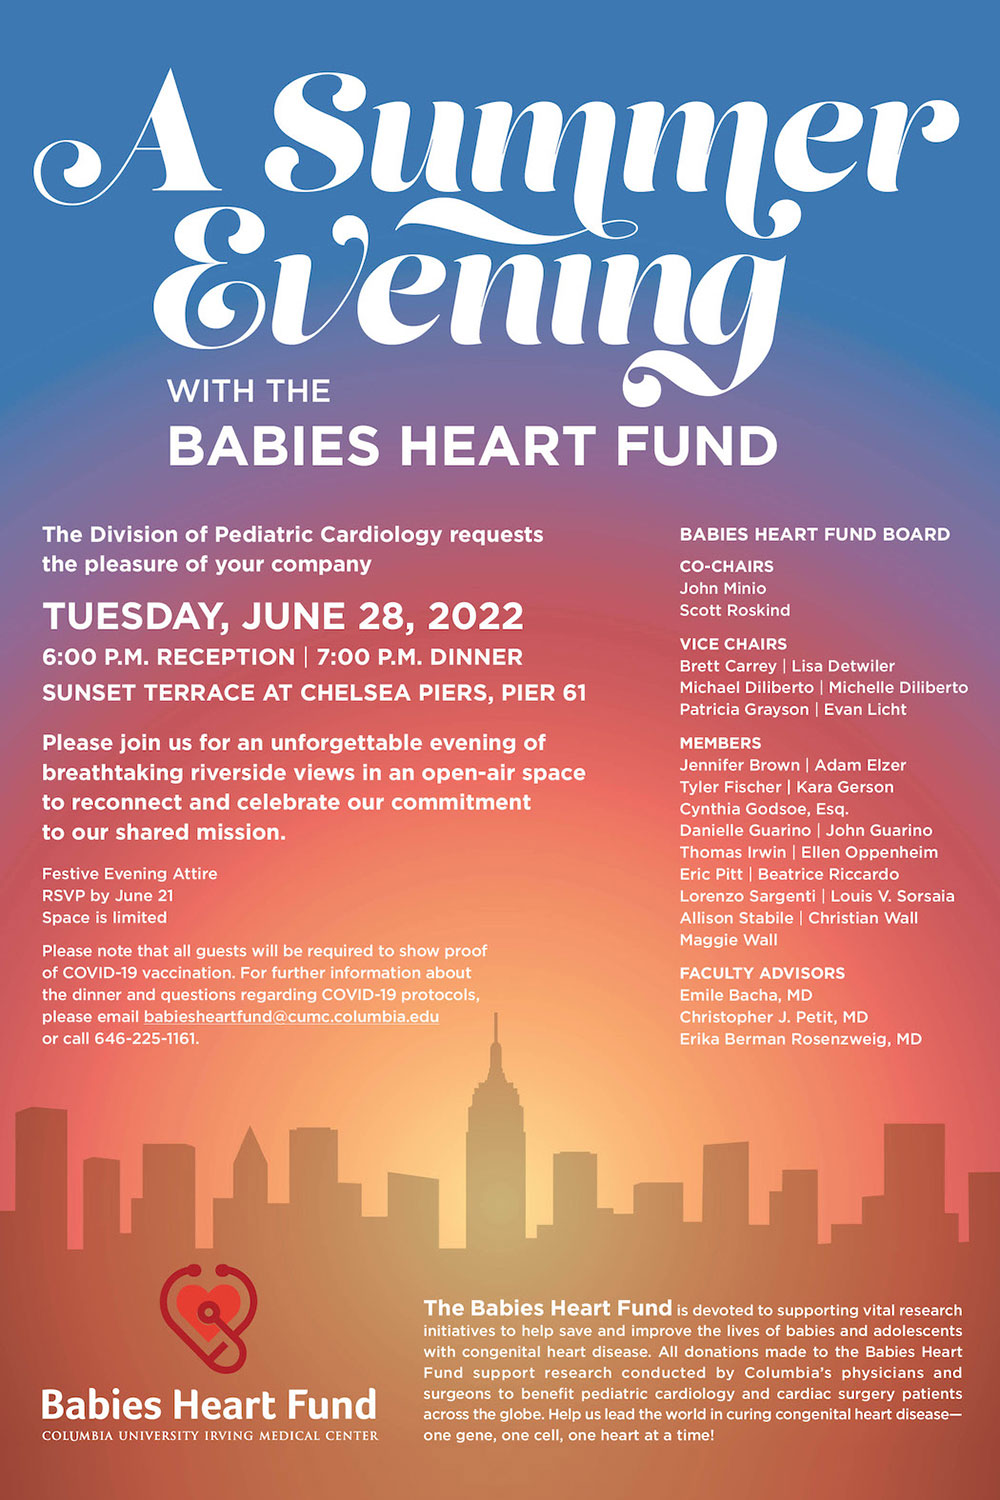 CLIENT:Columbia University Medical Center

DATE:June 2022

PROJECT:Invitation for Babies Heart Fund reception